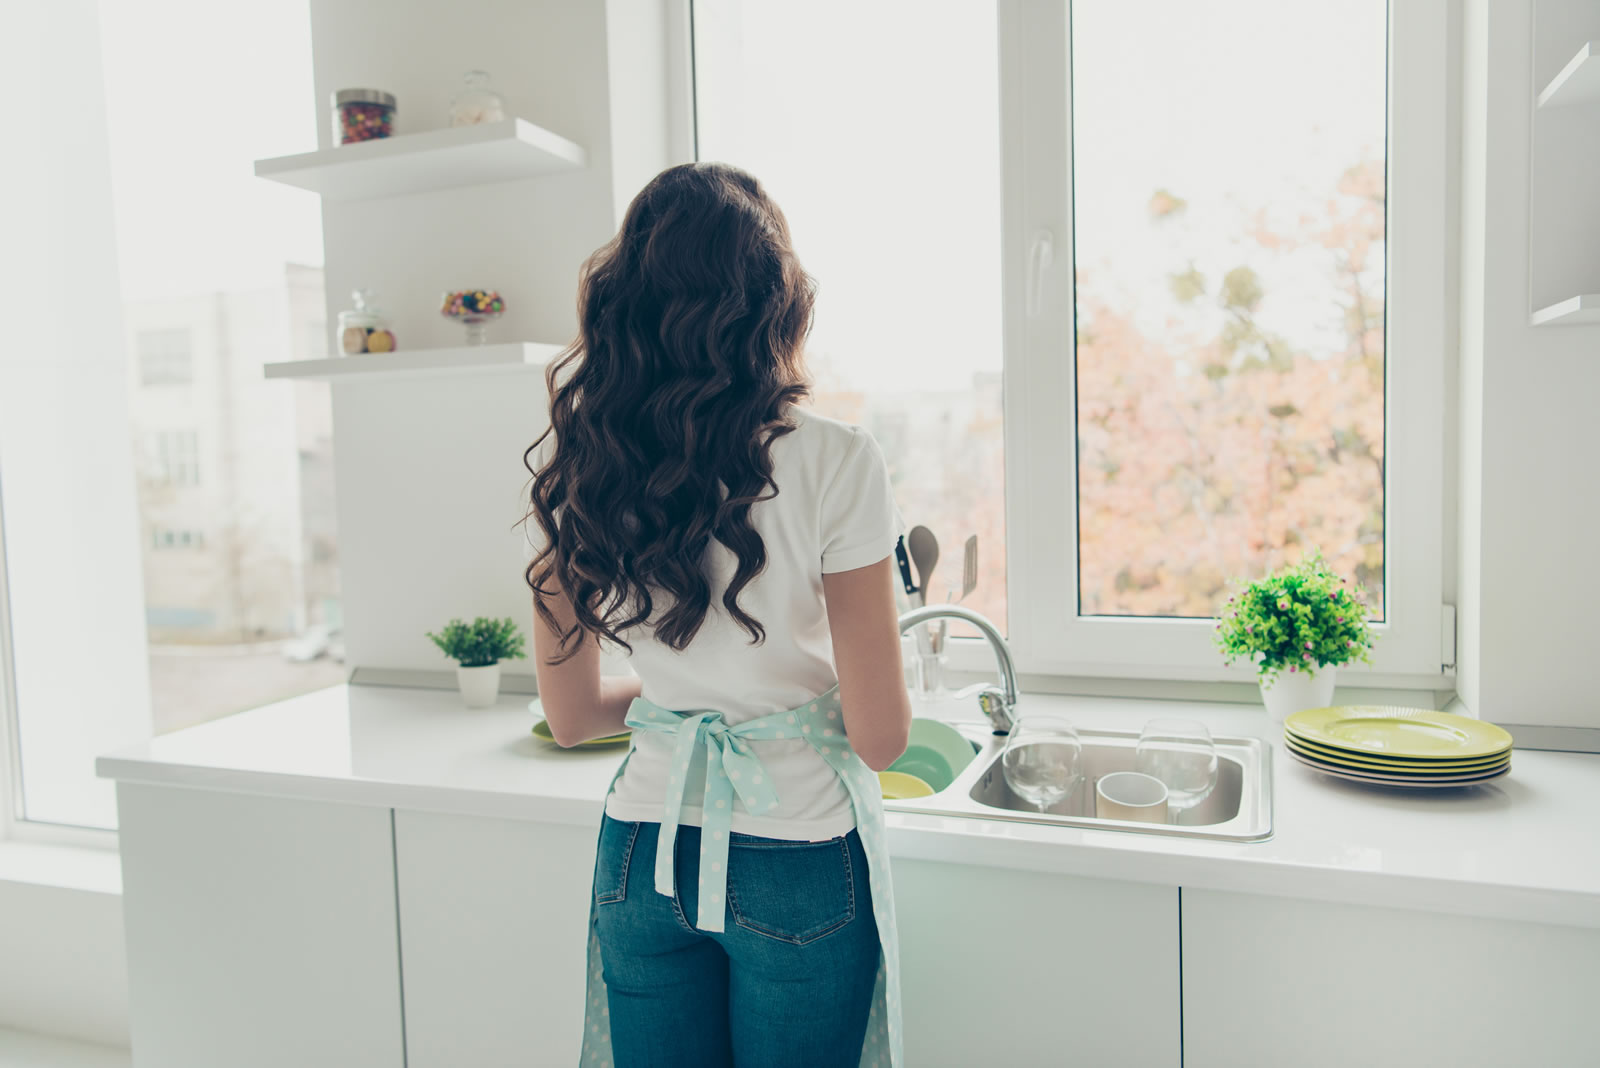 Woman testing medical packaging at kitchen sink, viewed from behind